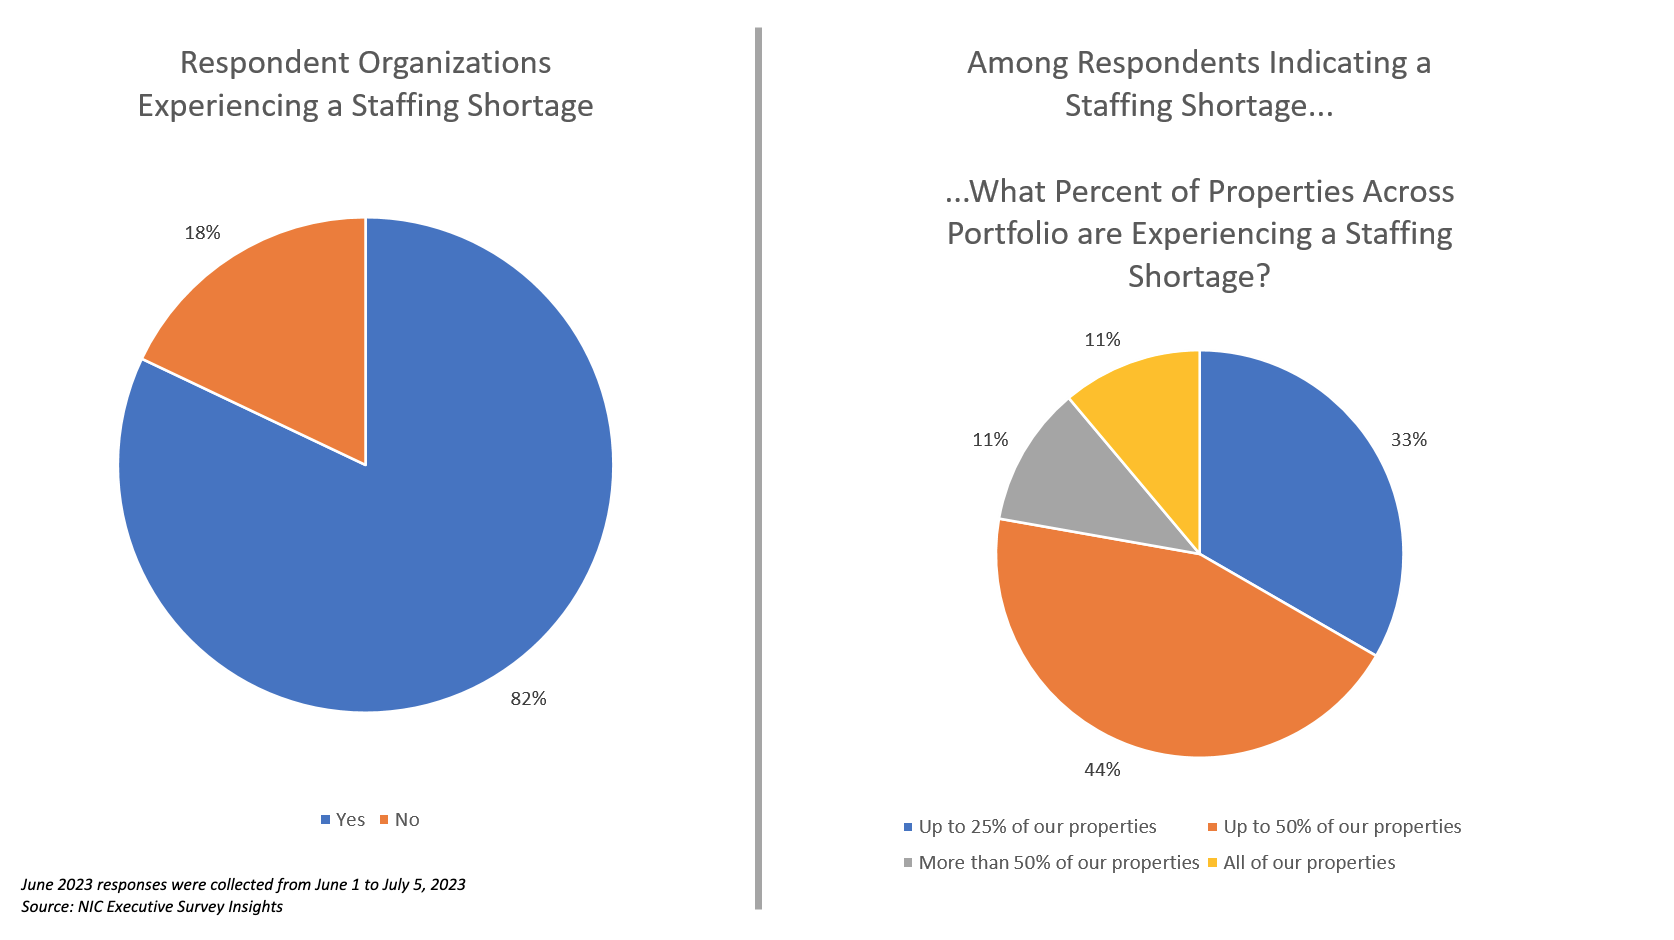 Staffing Shortage Pie Chart, left pie chart indicates 82% are shortstaffed, right pie chart indicates what percent of properties across portfolio are experiencing a staffing shortage, with 44% responding 'up to 50% of our properties', 33% responding 'up to 25%', 11% responding more than 50%, and remaining 11% responding 'all of our properties